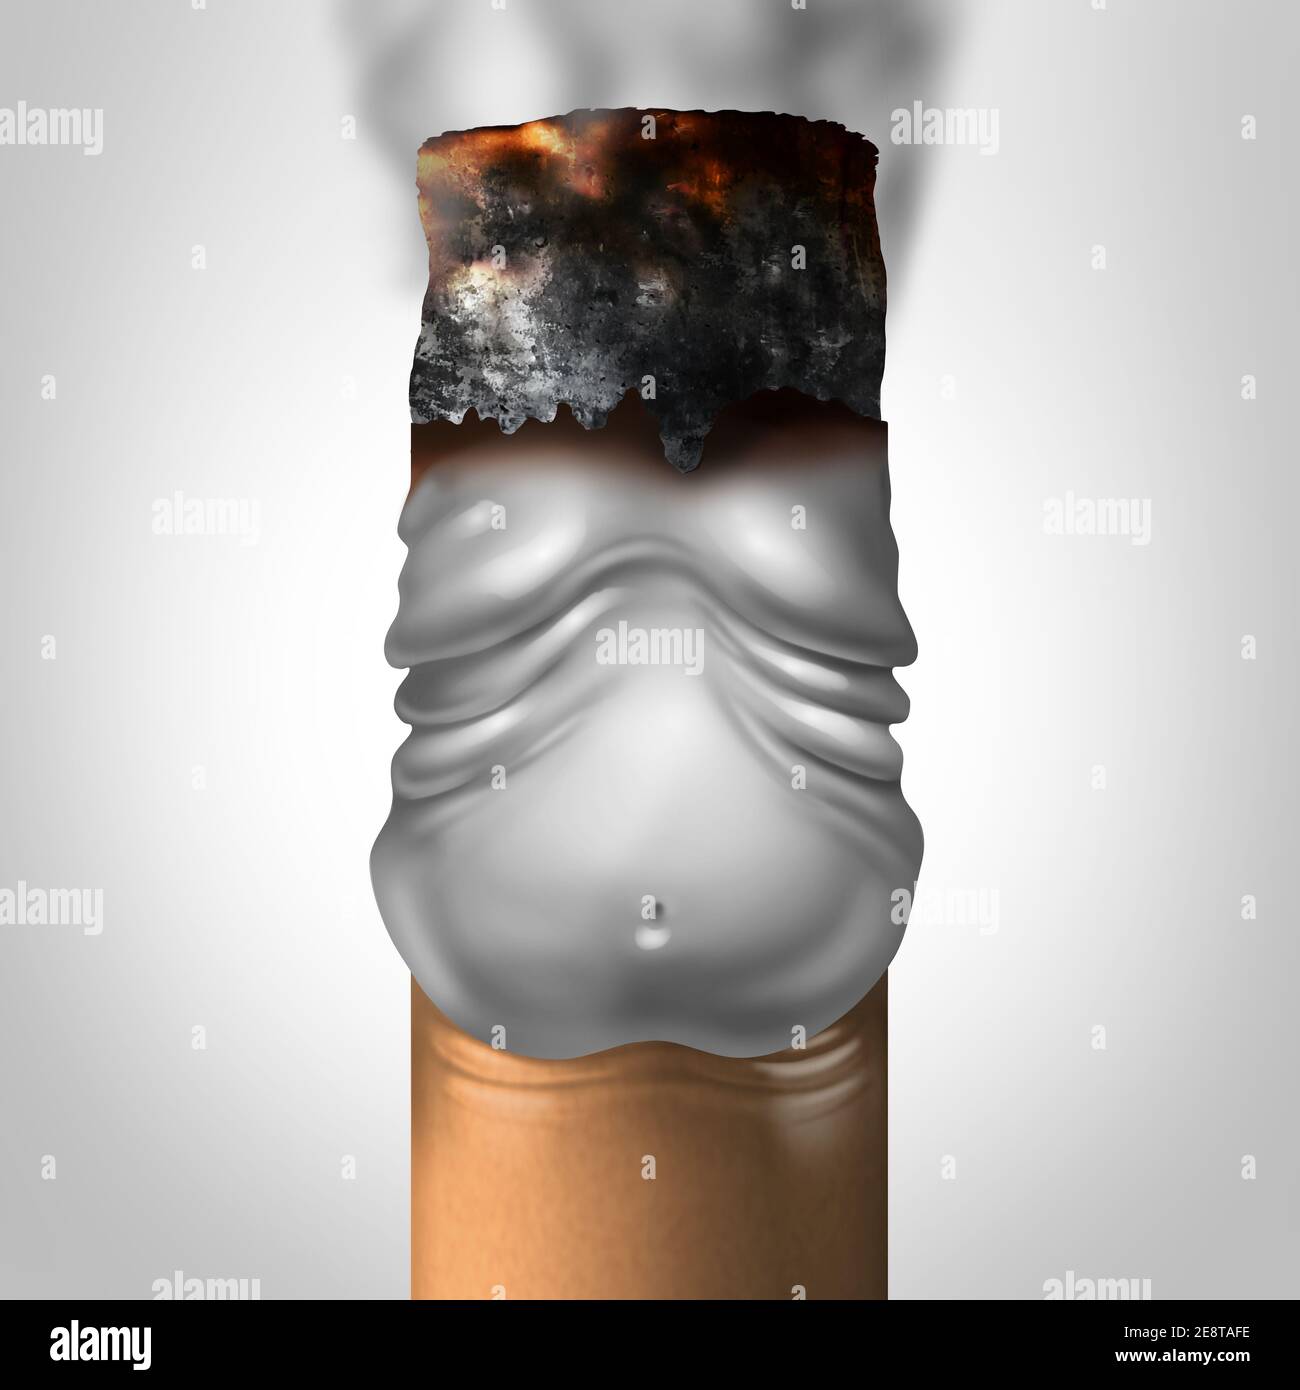 Smoking And obesity or smoker weight gain as a medical concept with a lit cigarette shaped as an overweight symbol of nicotine addiction. Stock Photo